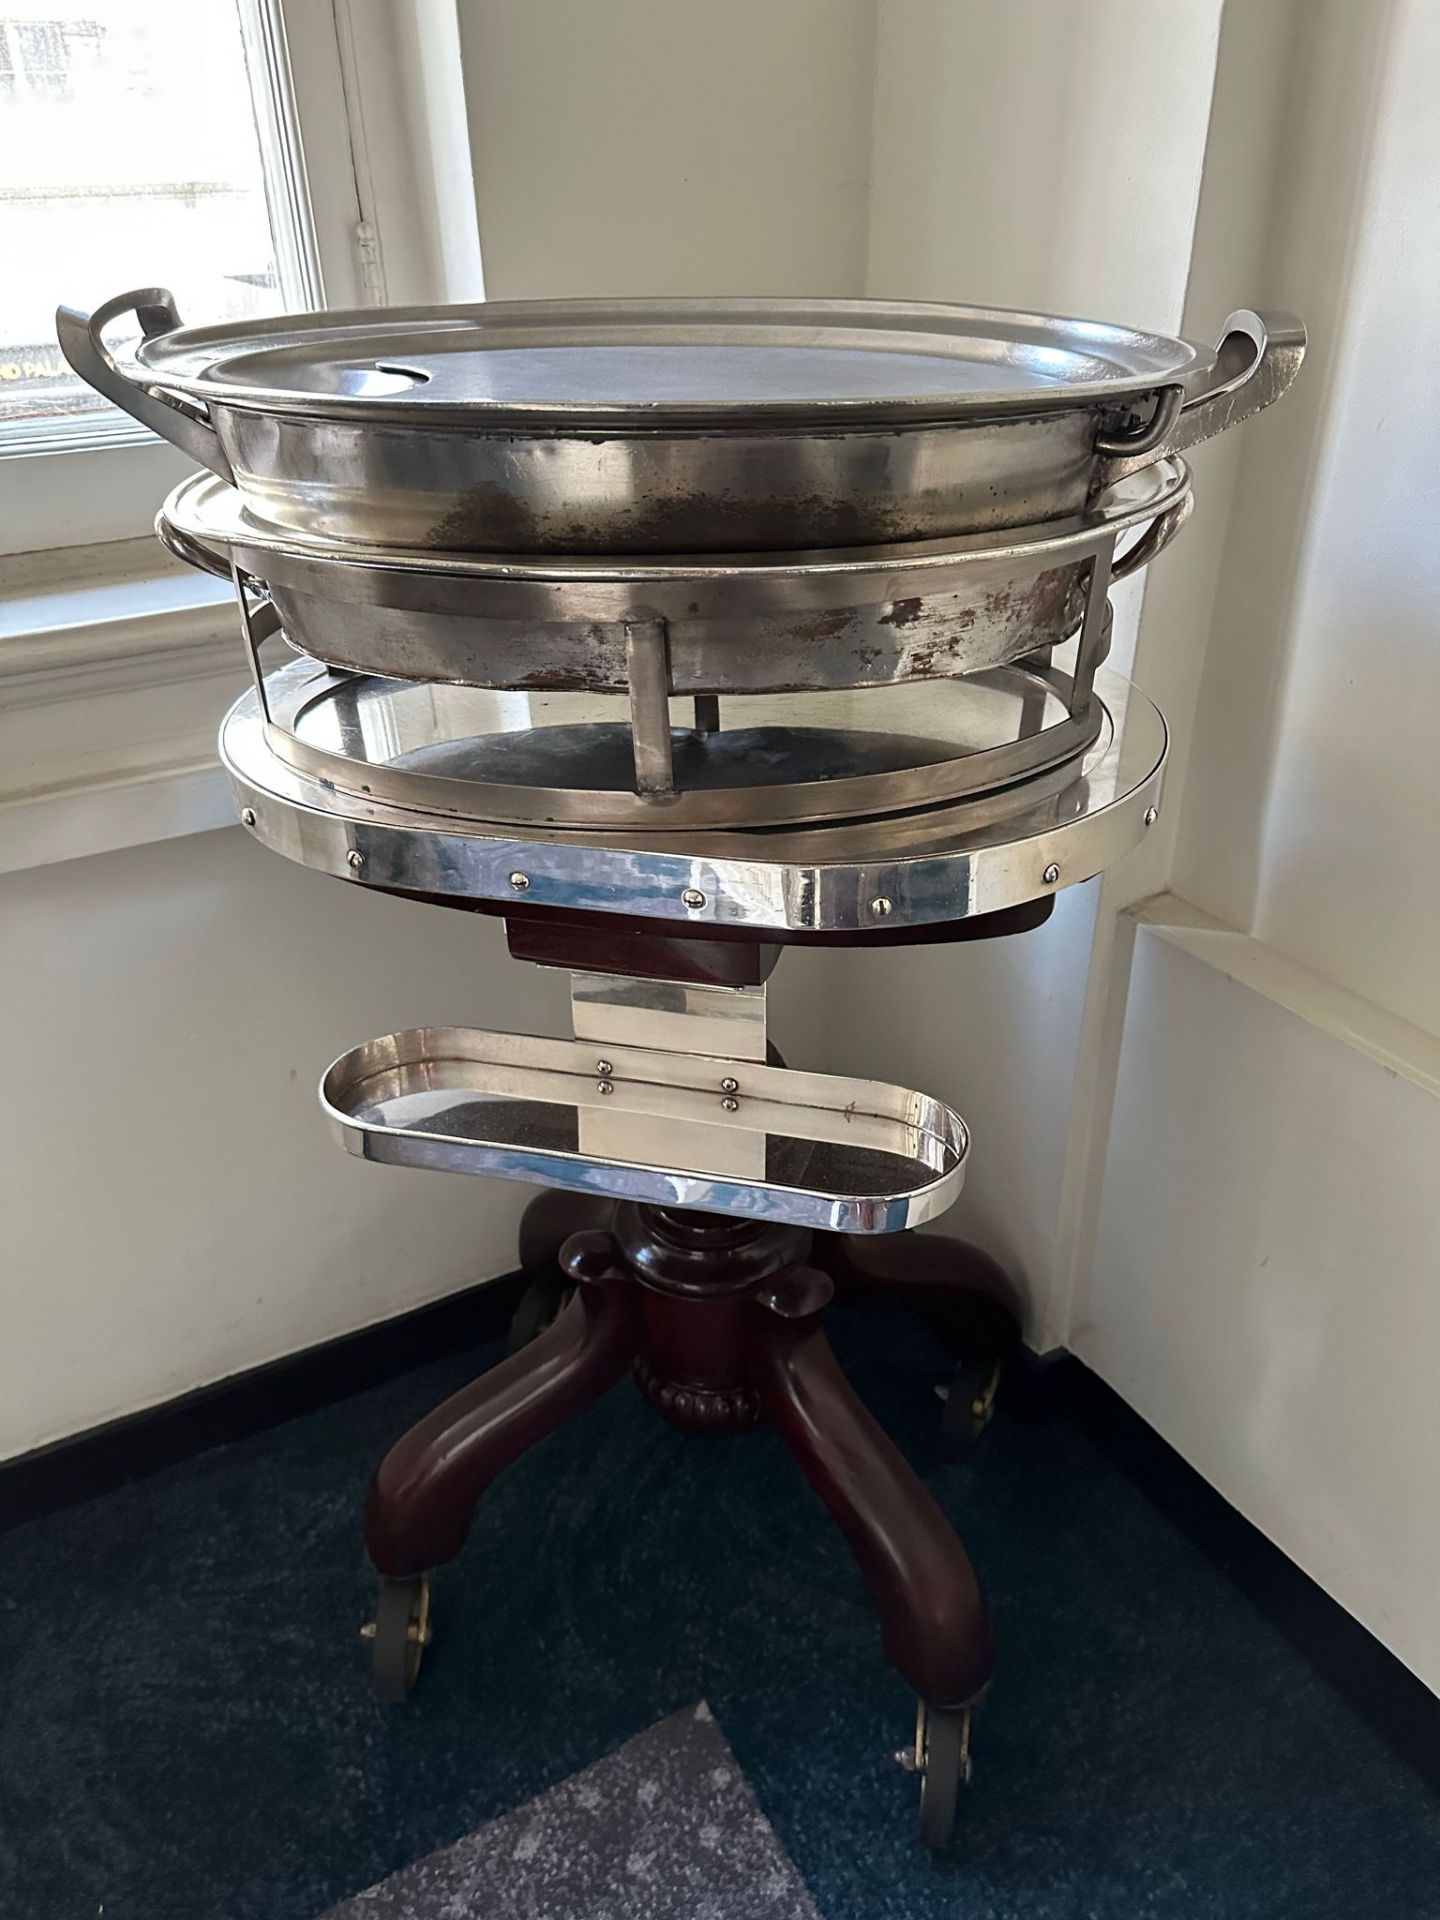 Mahogany Meat Carving Unit With Mahogany Baluster Frame On Caster Wheels With 2 Stainless Steel Tray - Bild 3 aus 3